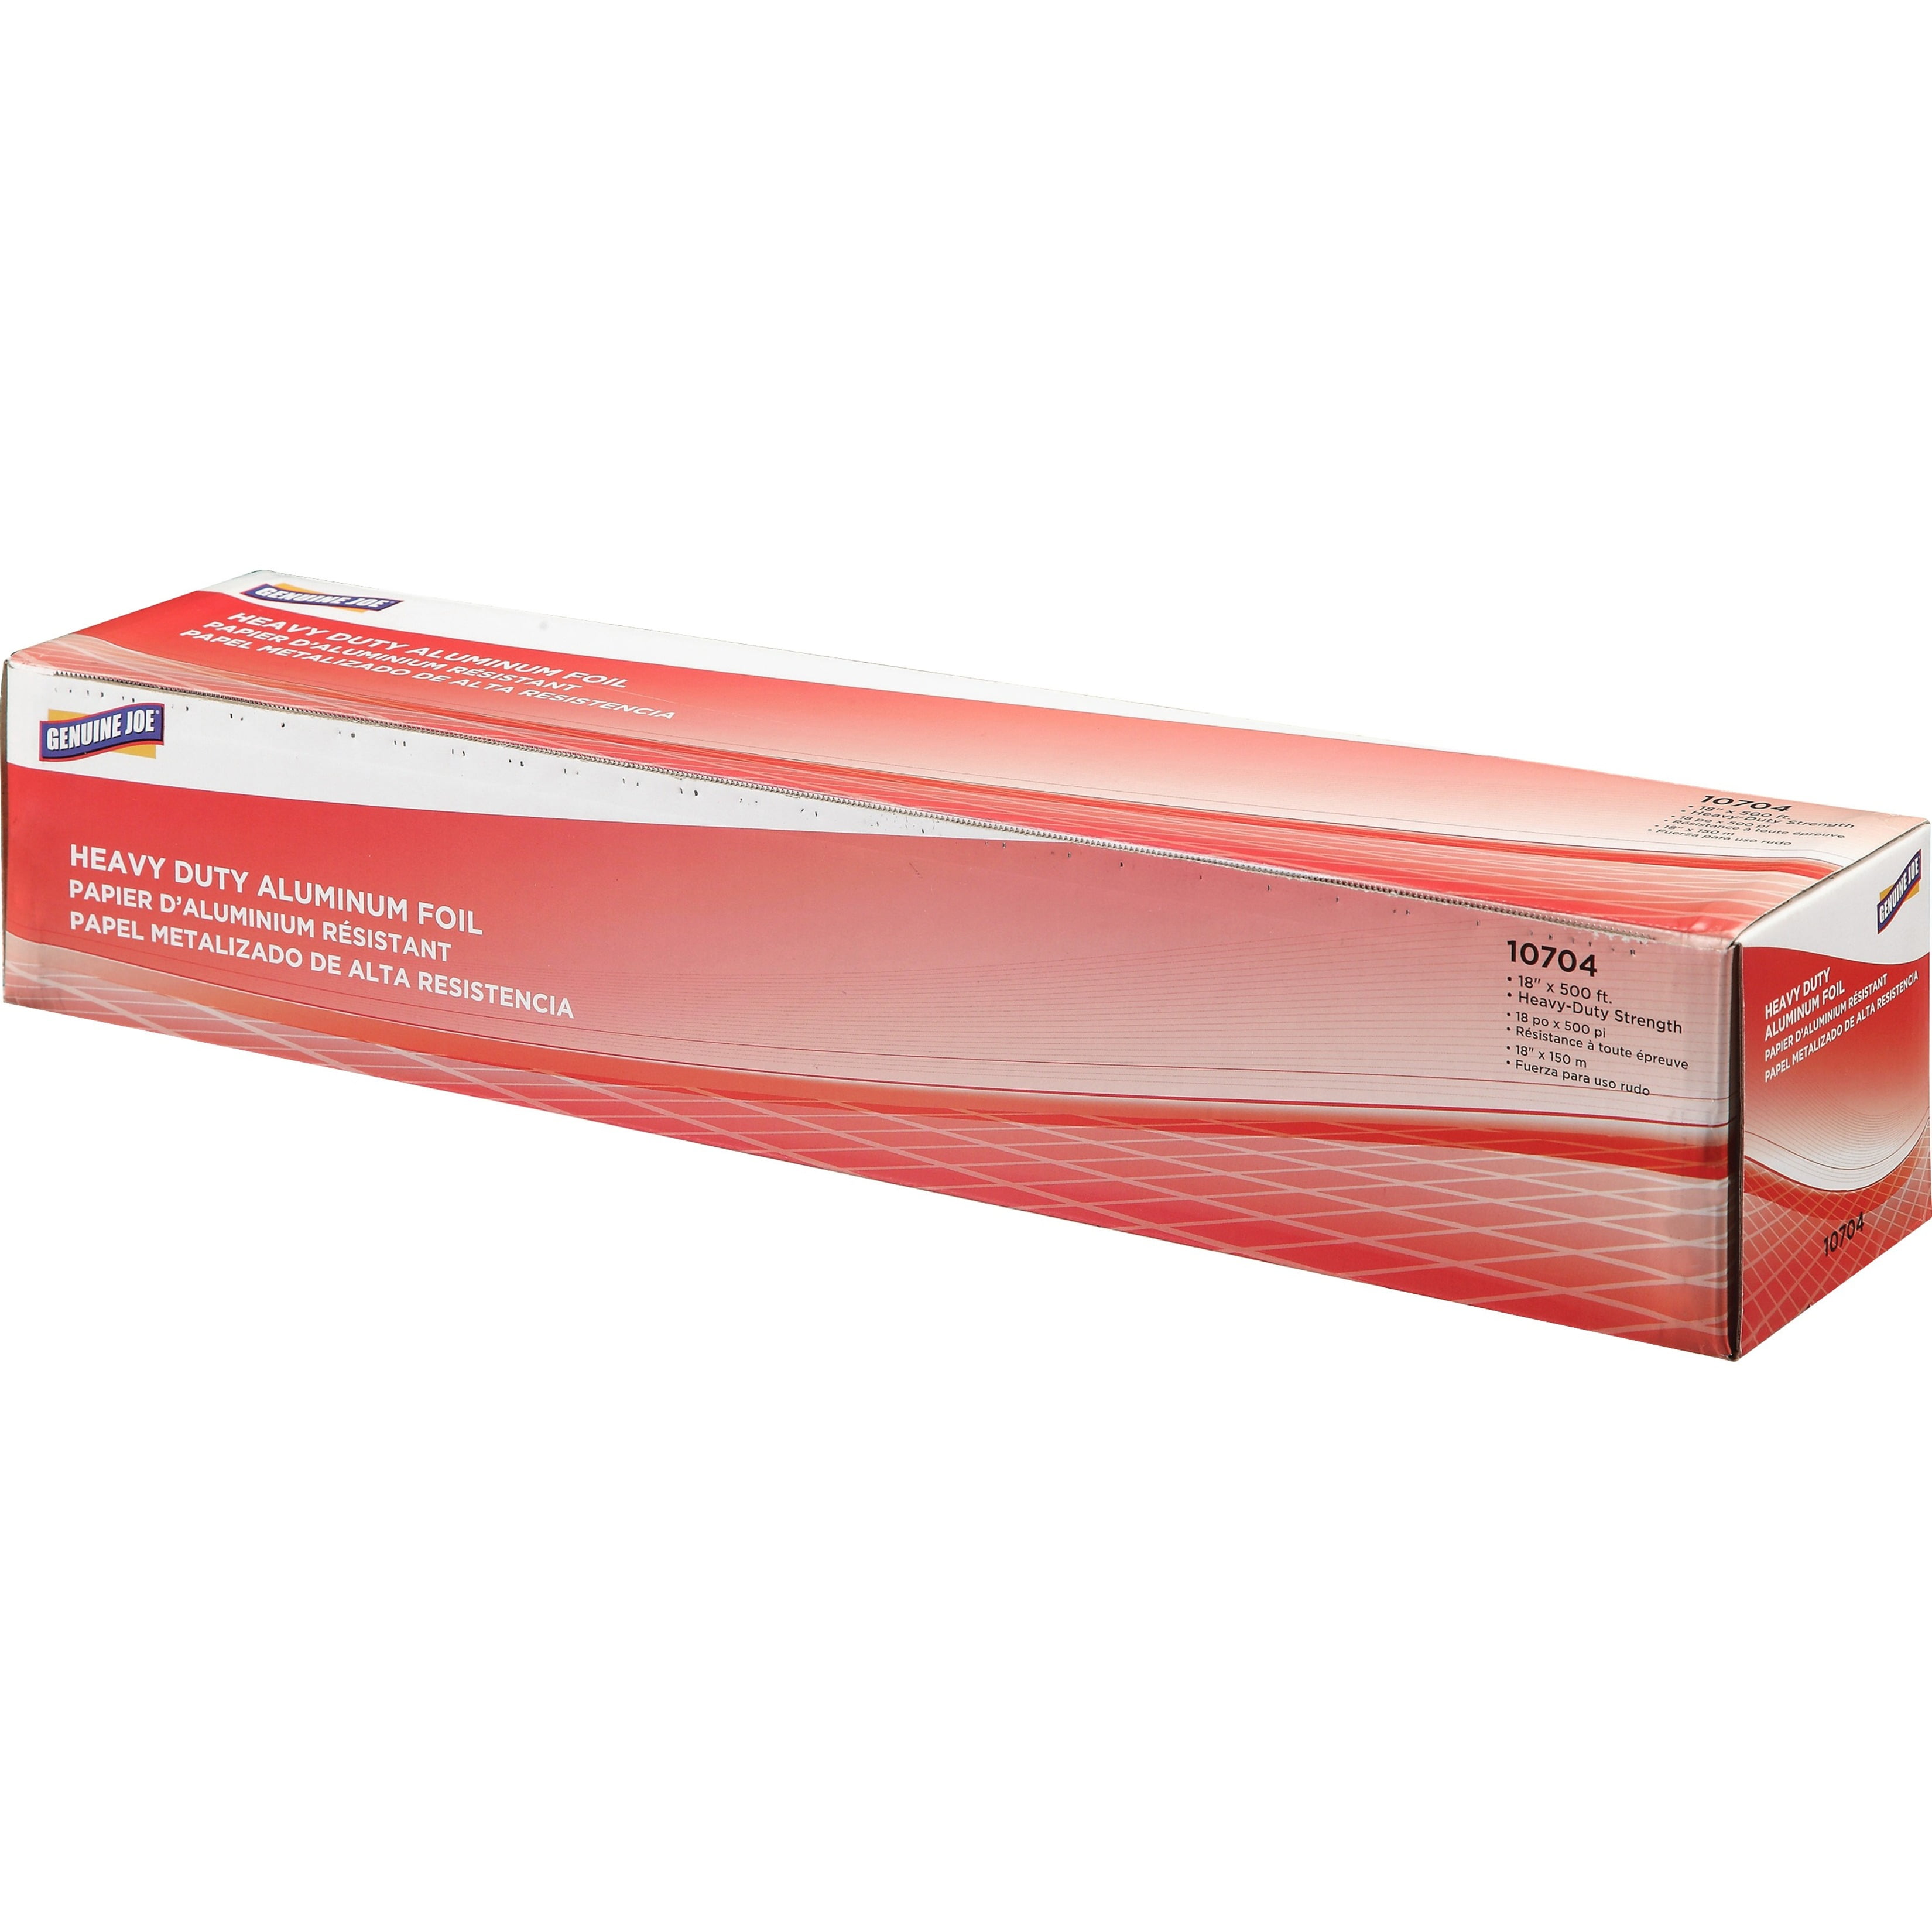 Baco Extra Thick 18" Clingfilm 450mm x 300m in Cutter Box Catering Storage 